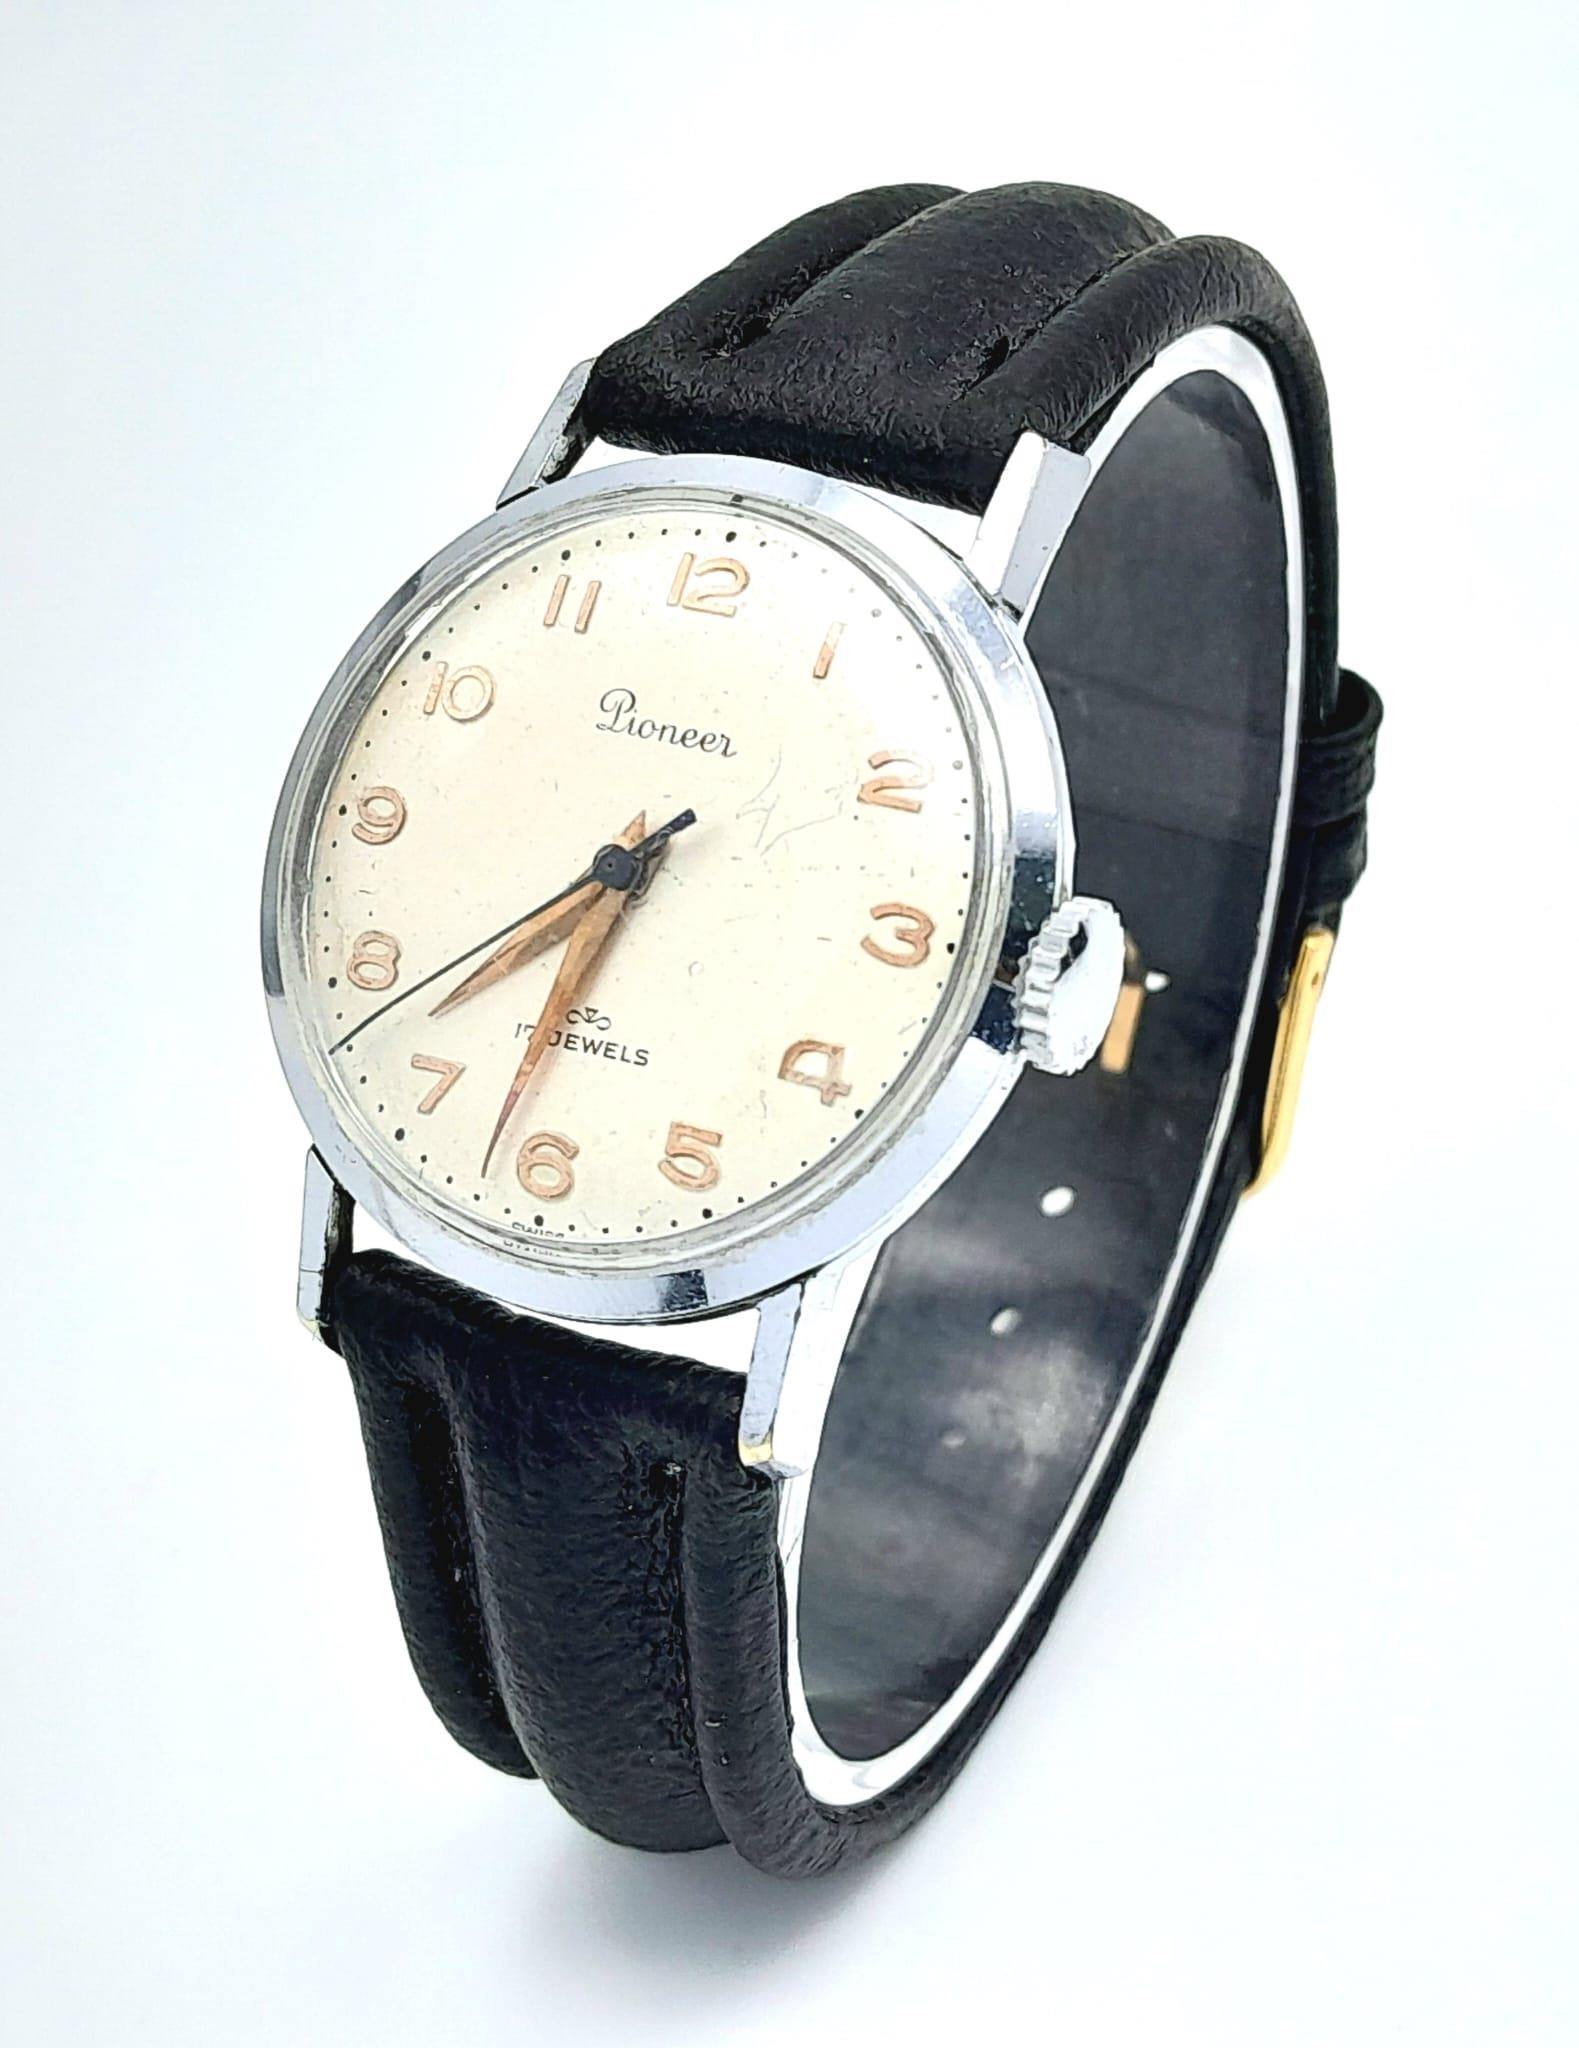 A Vintage Pioneer Mechanical 17 Jewels Gents Watch. Black leather strap. Stainless steel case -